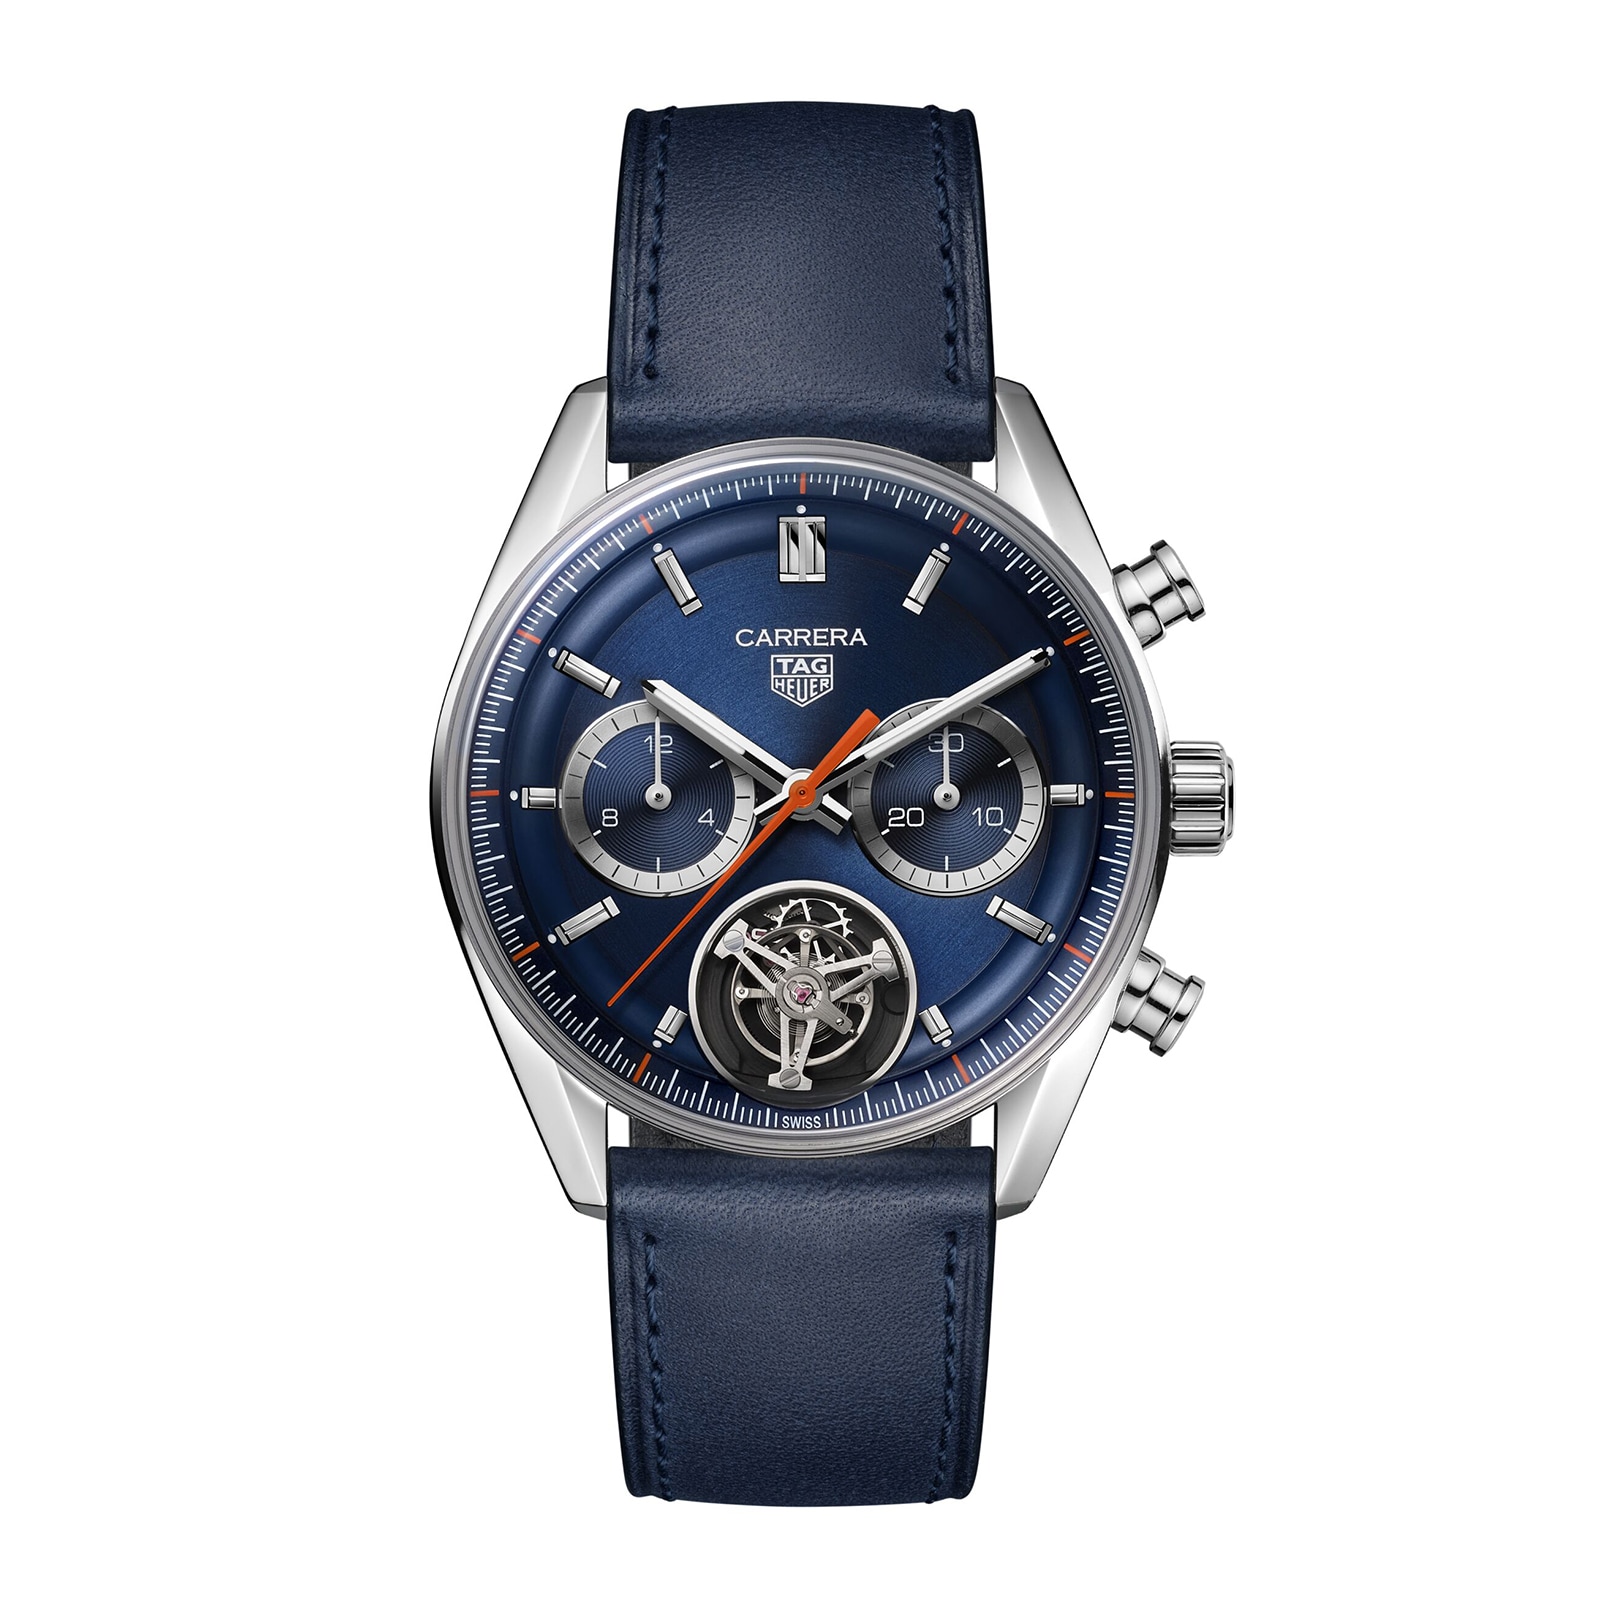 Tag Heuer Carrera Chronograph Tourbillon 42mm Watch - Blue Dial - Blue Leather Band - Steel Case